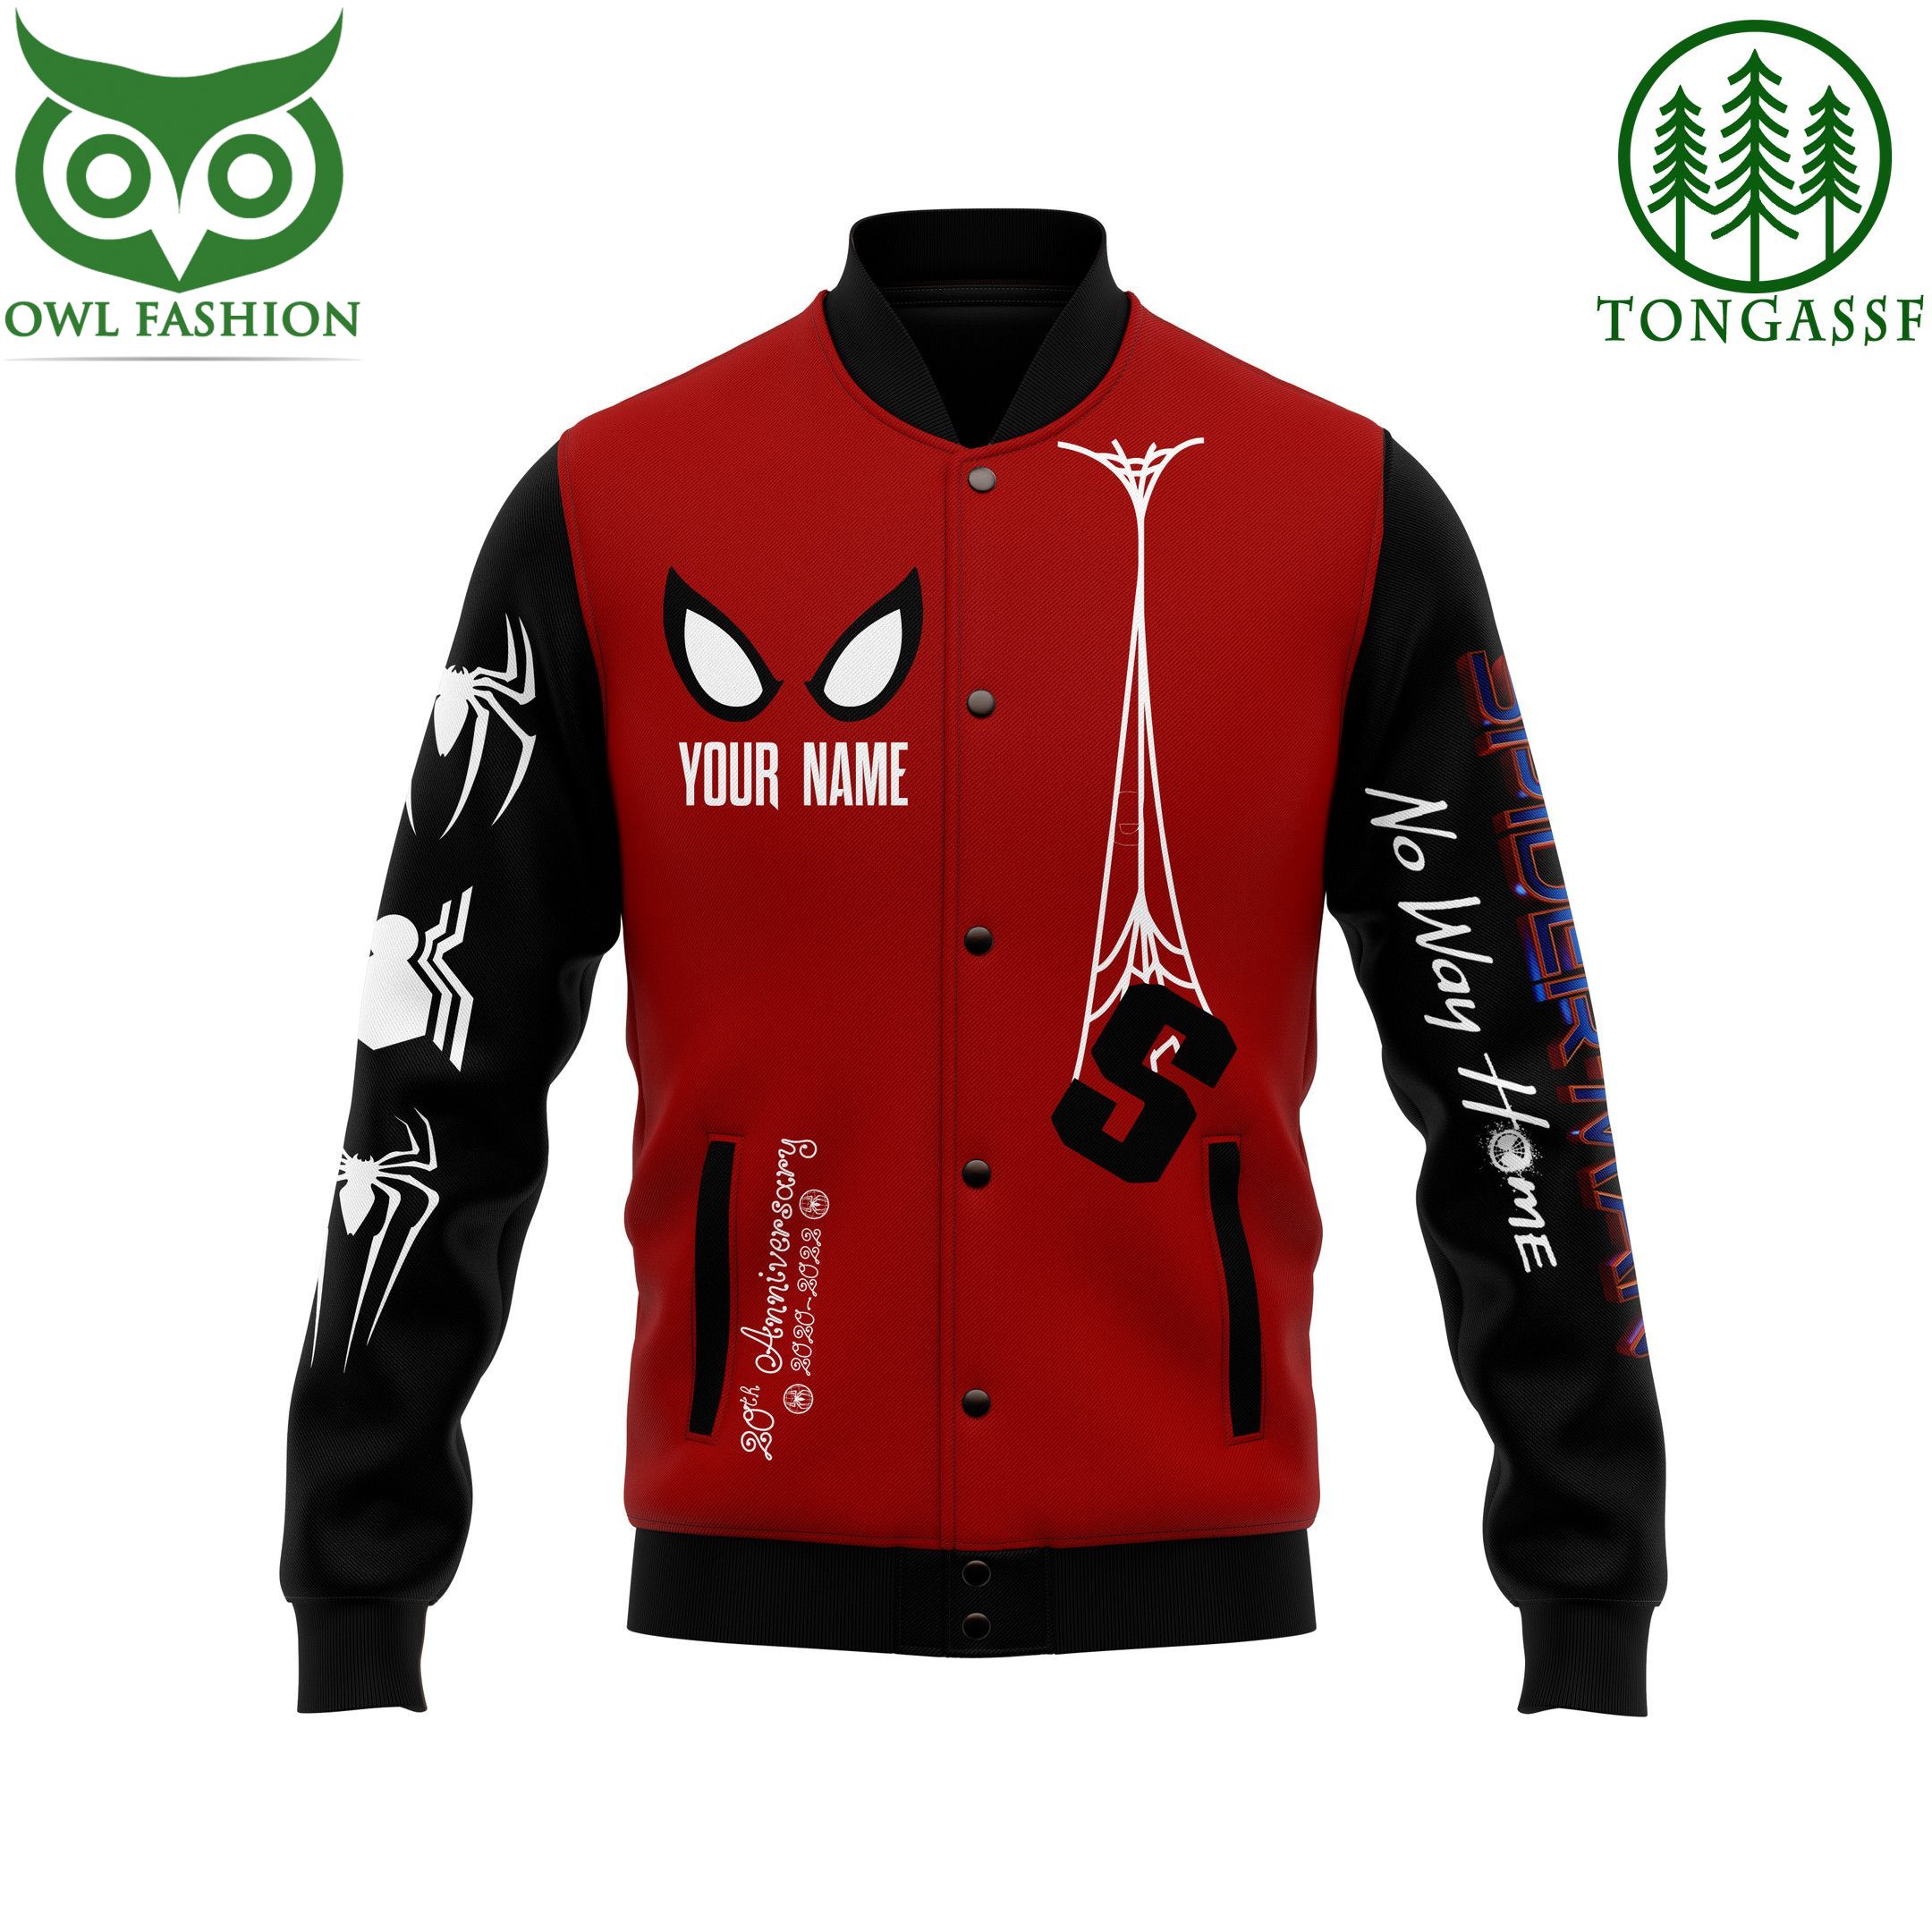 29 Spiderman No way home personalized bomber jacket